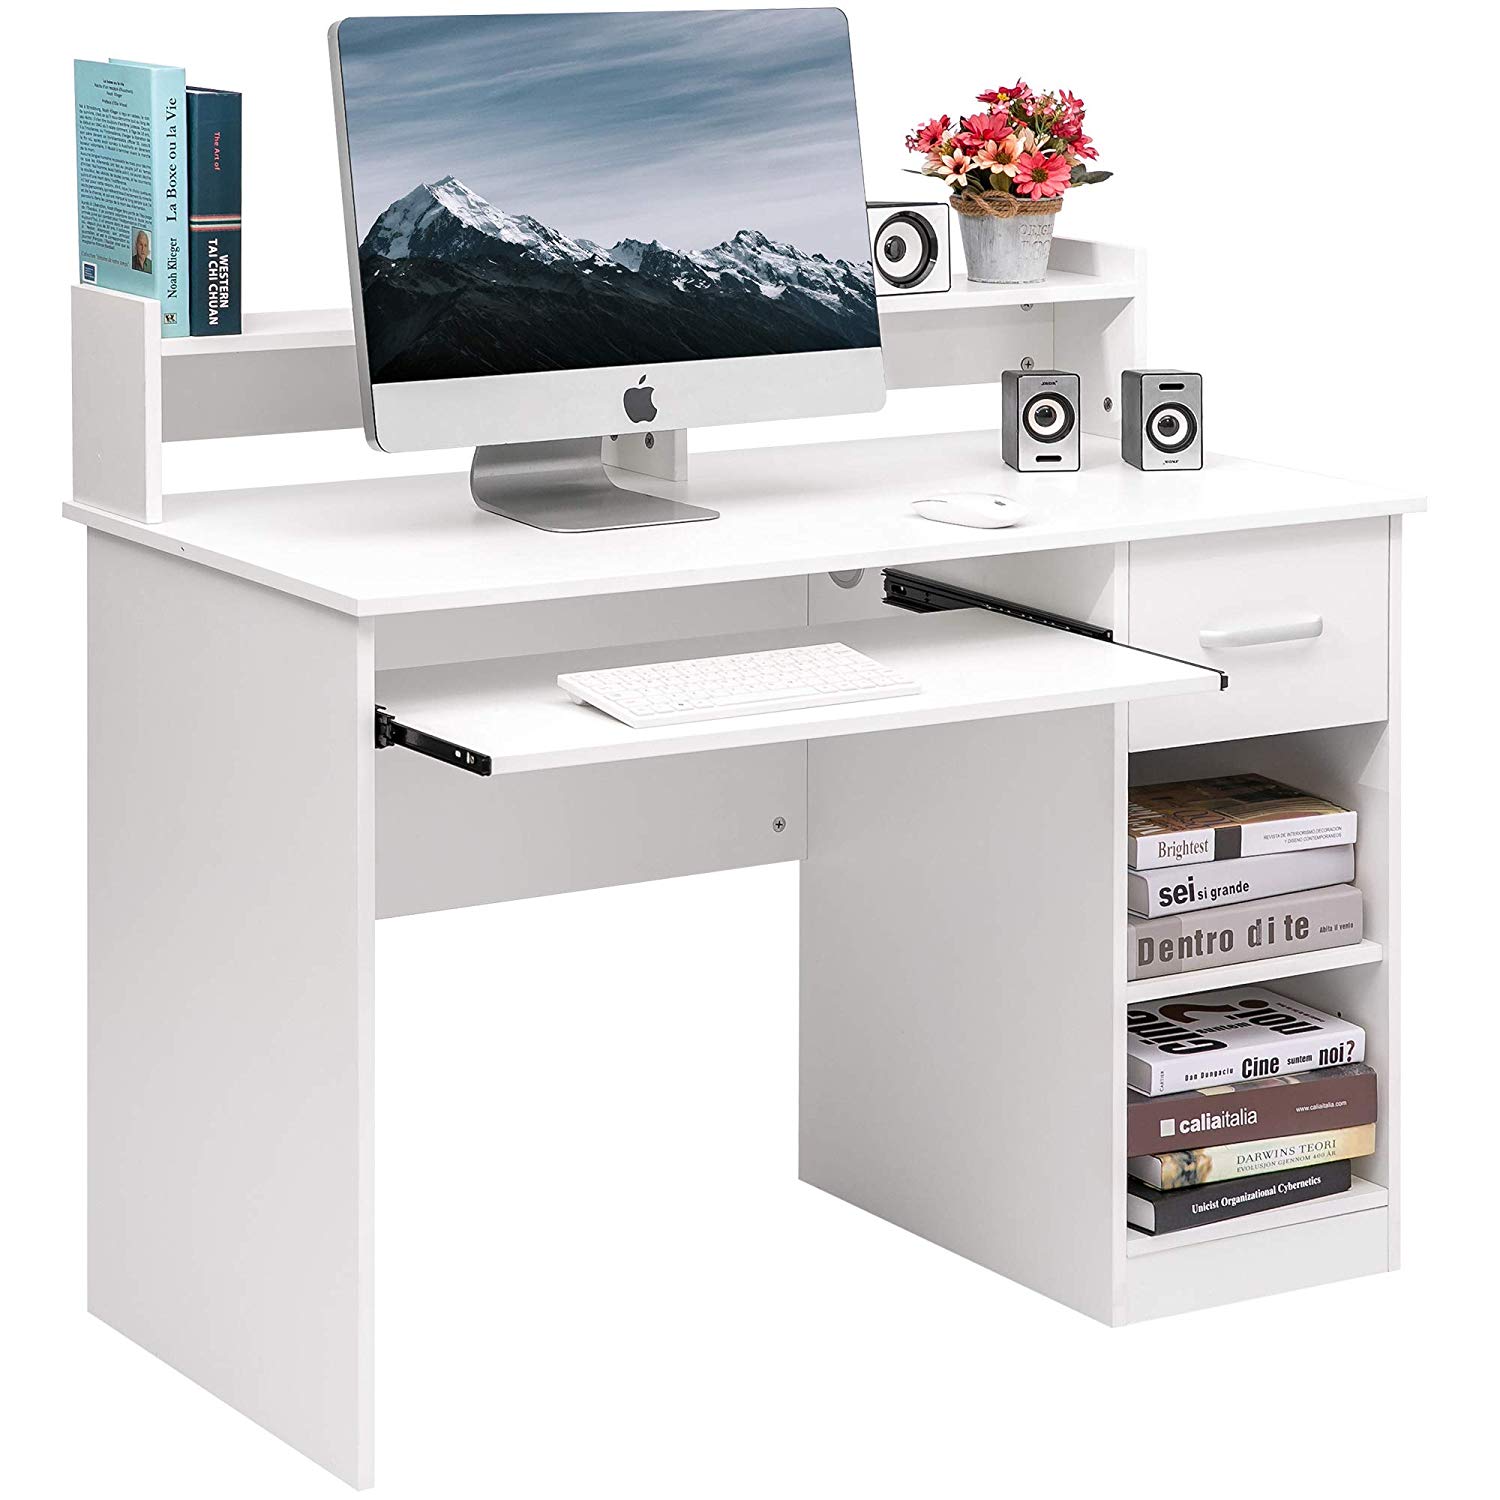 Winado Computer Desk Home Office Workstation Laptop Study Table with Drawer Keyboard Tray, White - image 1 of 8